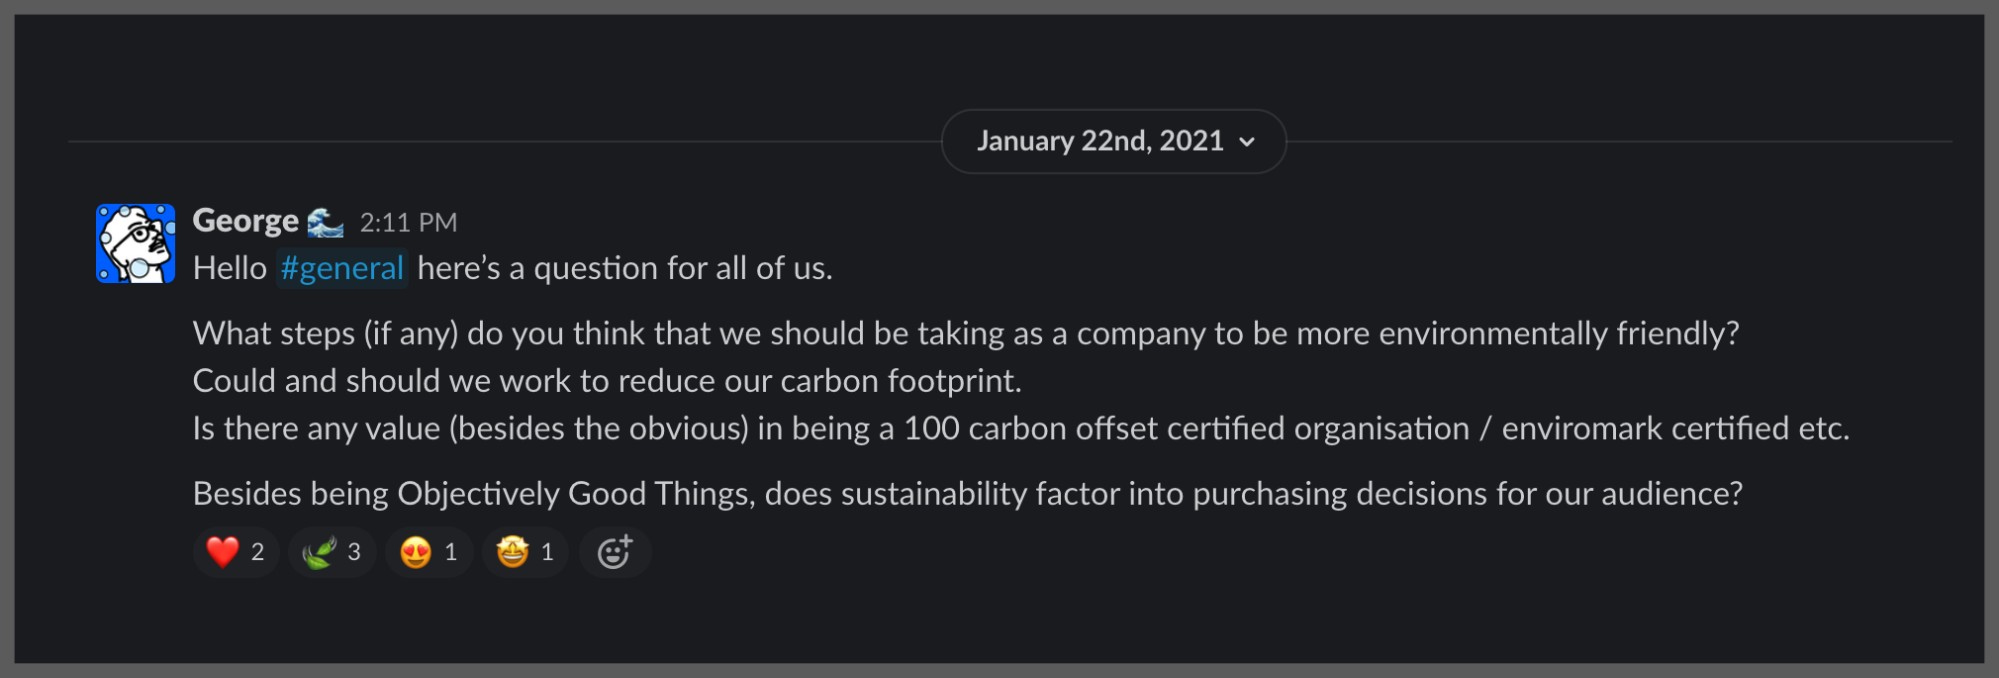 A screenshot of a Slack message from George that asks the Karbon team if they should consider reducing their carbon footprint.